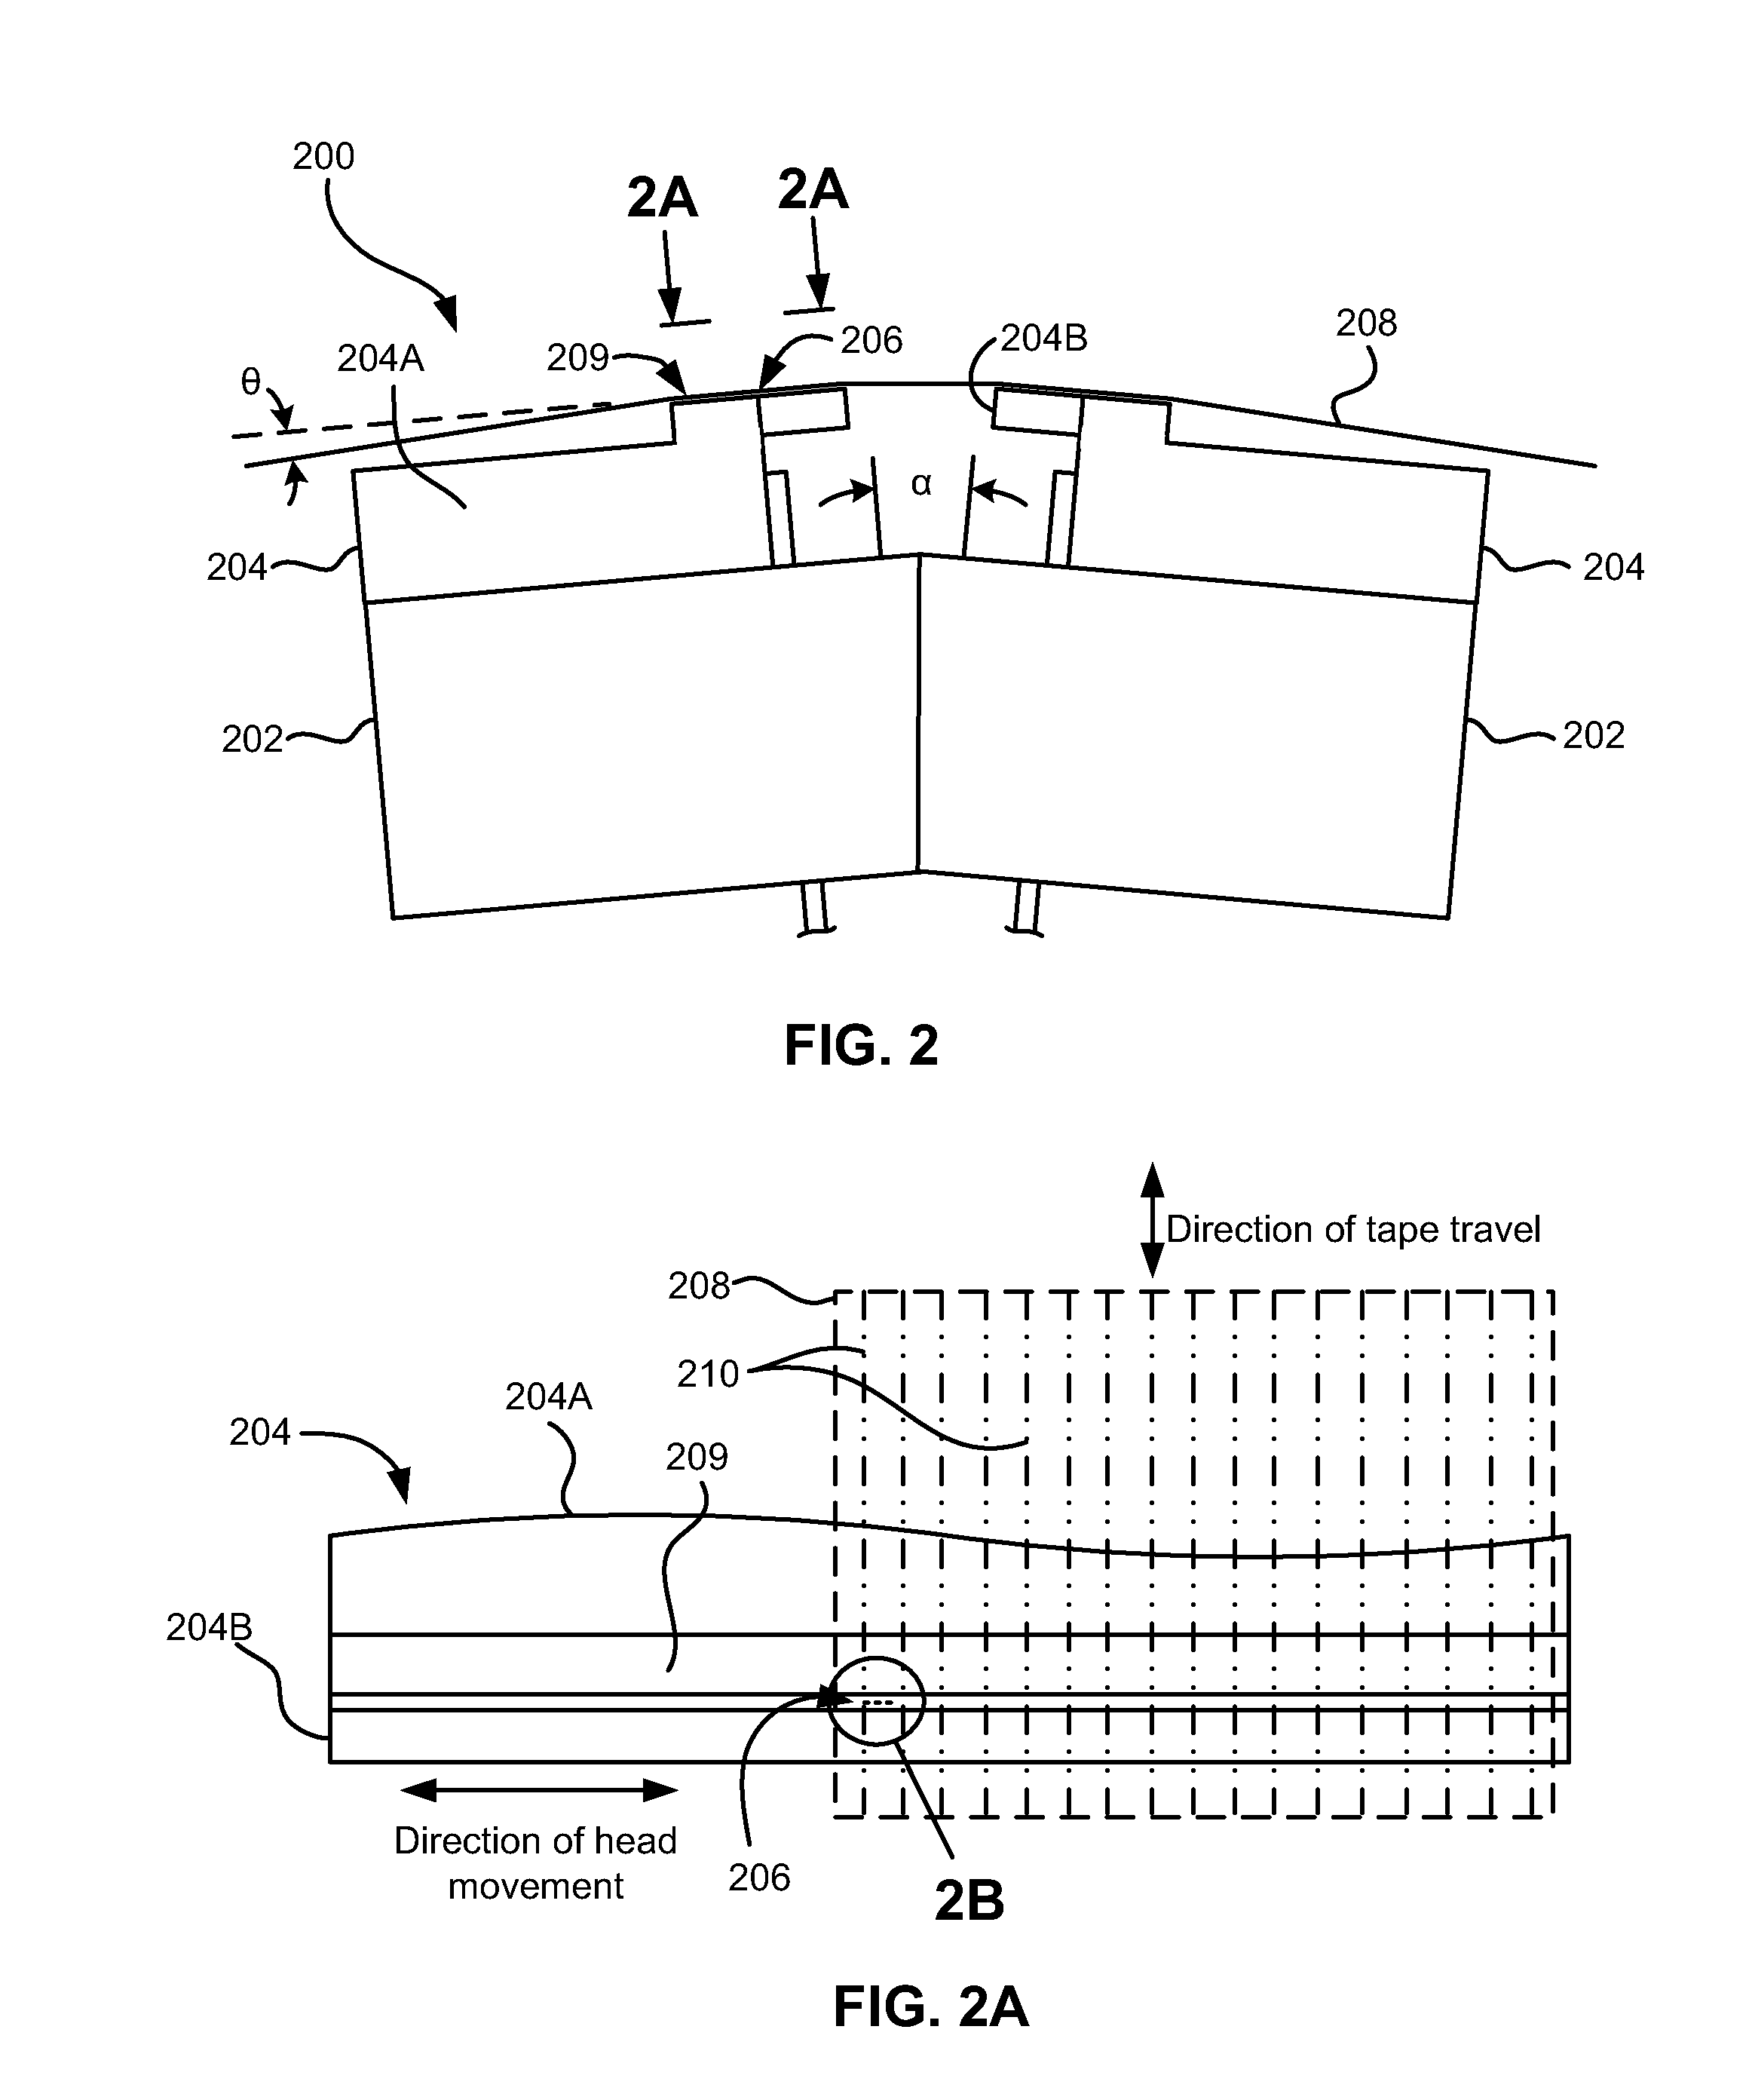 Tension transients suppression during acceleration and/or deceleration for storage tape drive